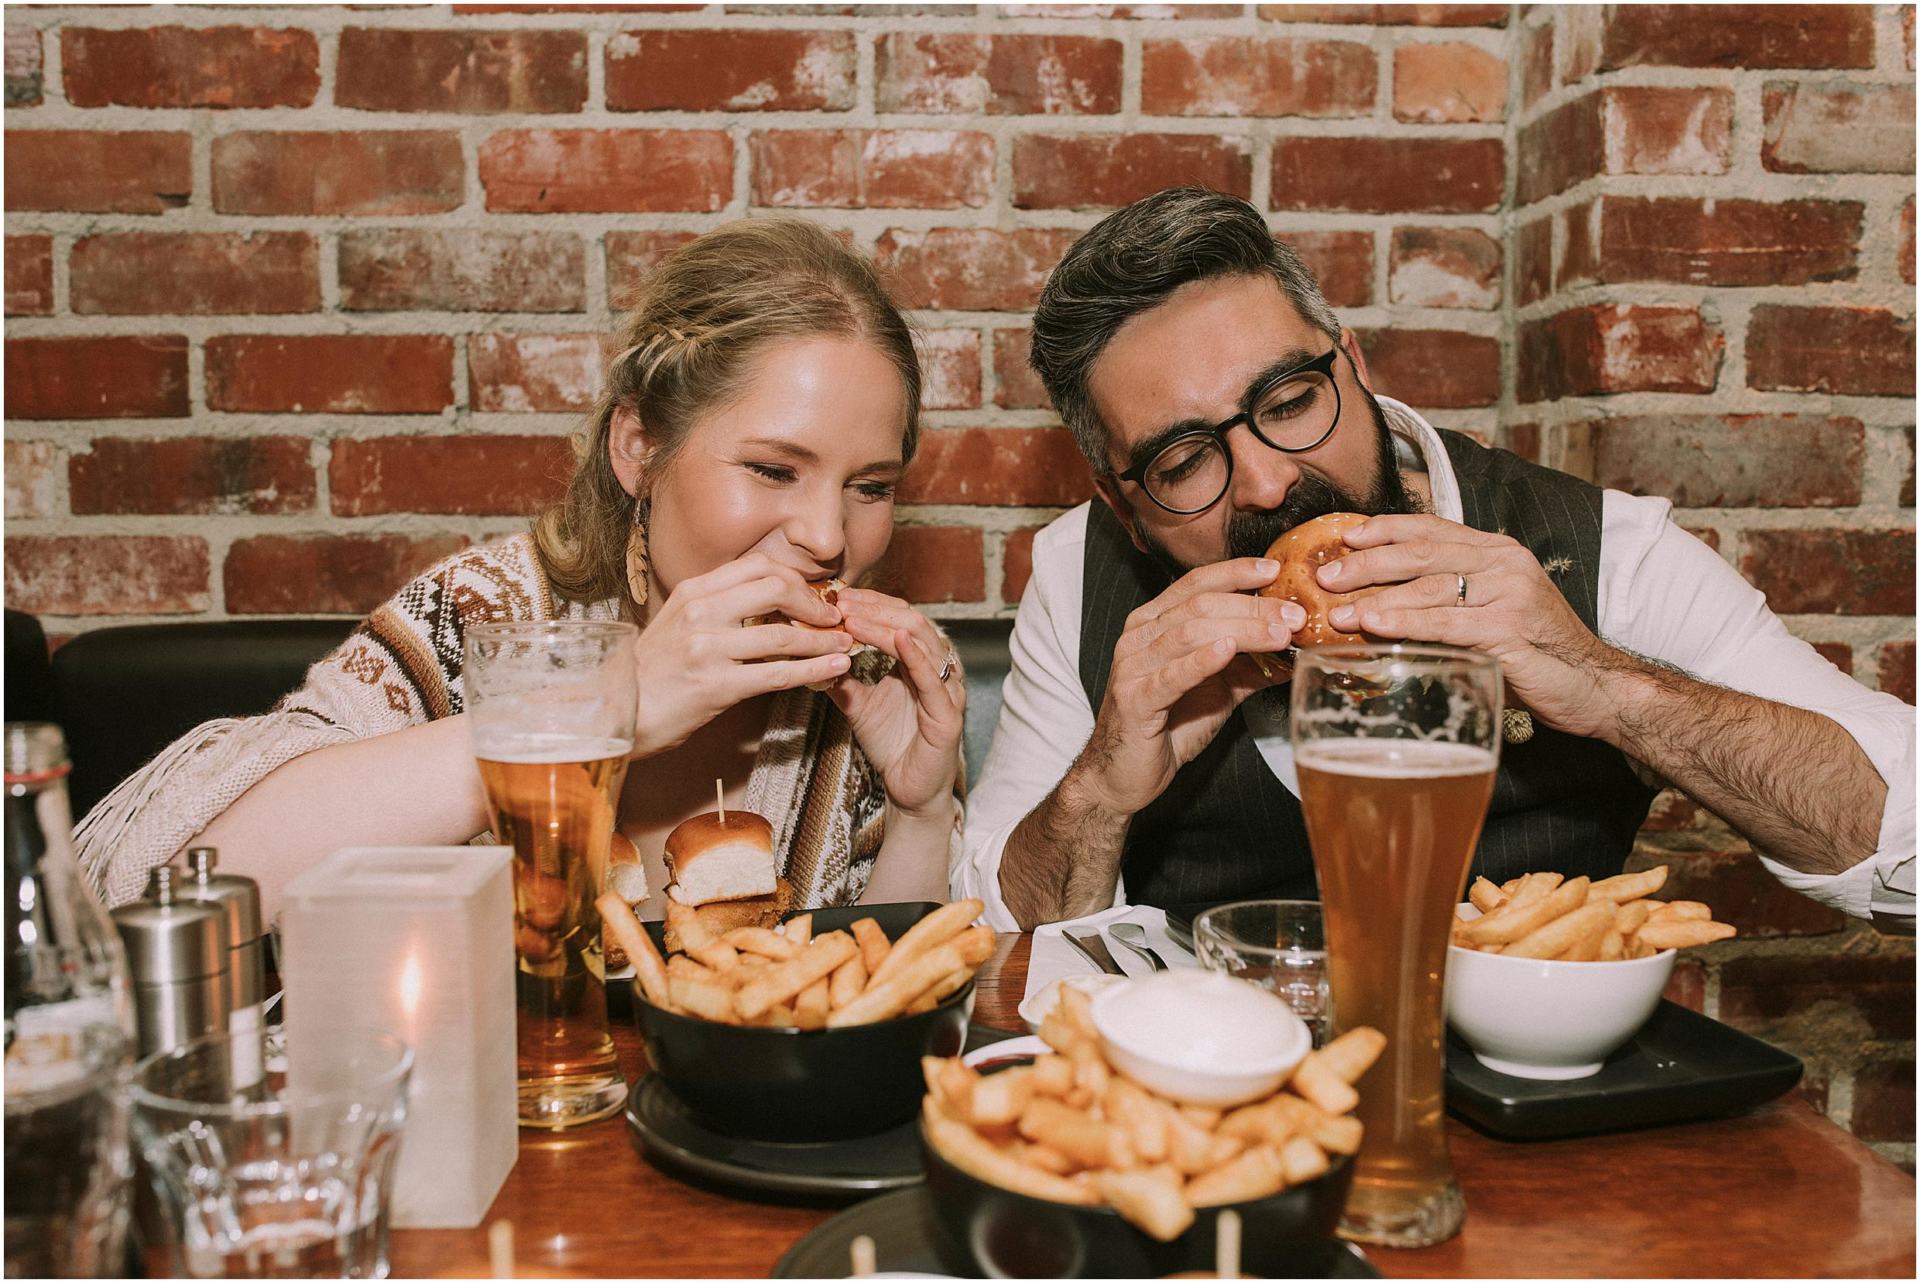 Charlotte Kiri Photography - elopement photography with bride and groom enjoying eating burgers and fries accompanied by a glass of beer at a local restaurant in Wanaka, New Zealand